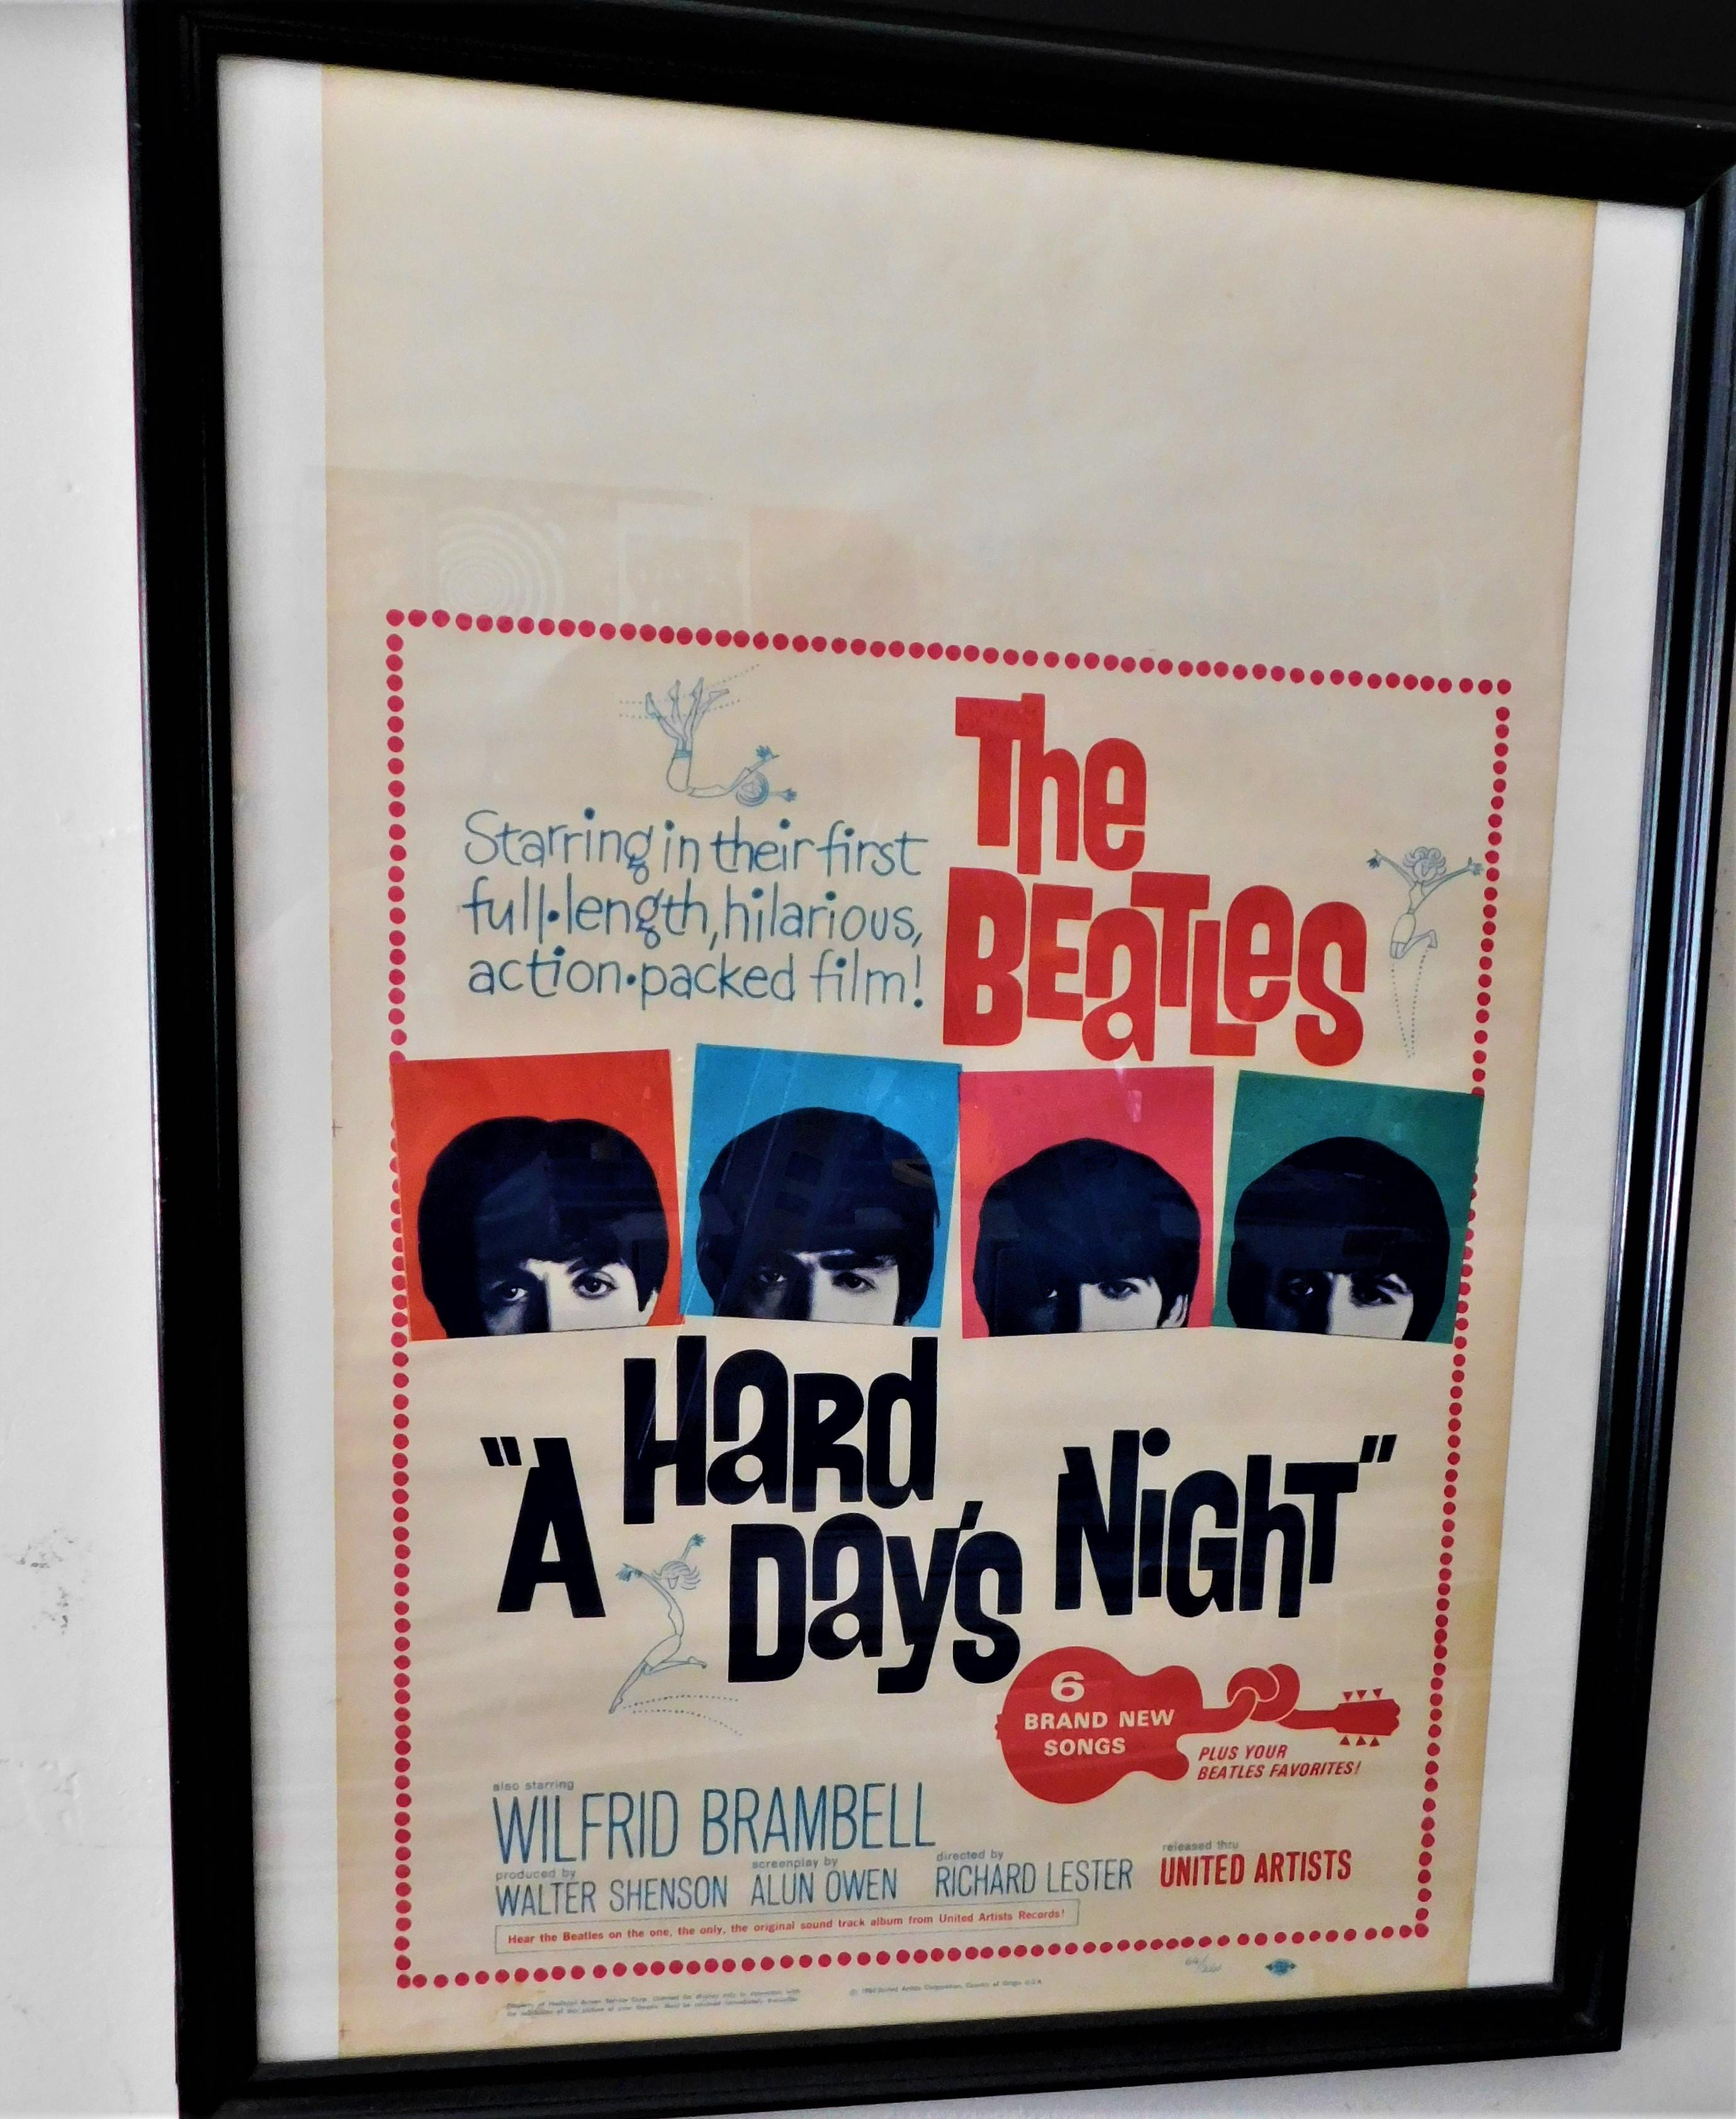 Paper The Beatles Original a Hard Days Night Window Card For Sale